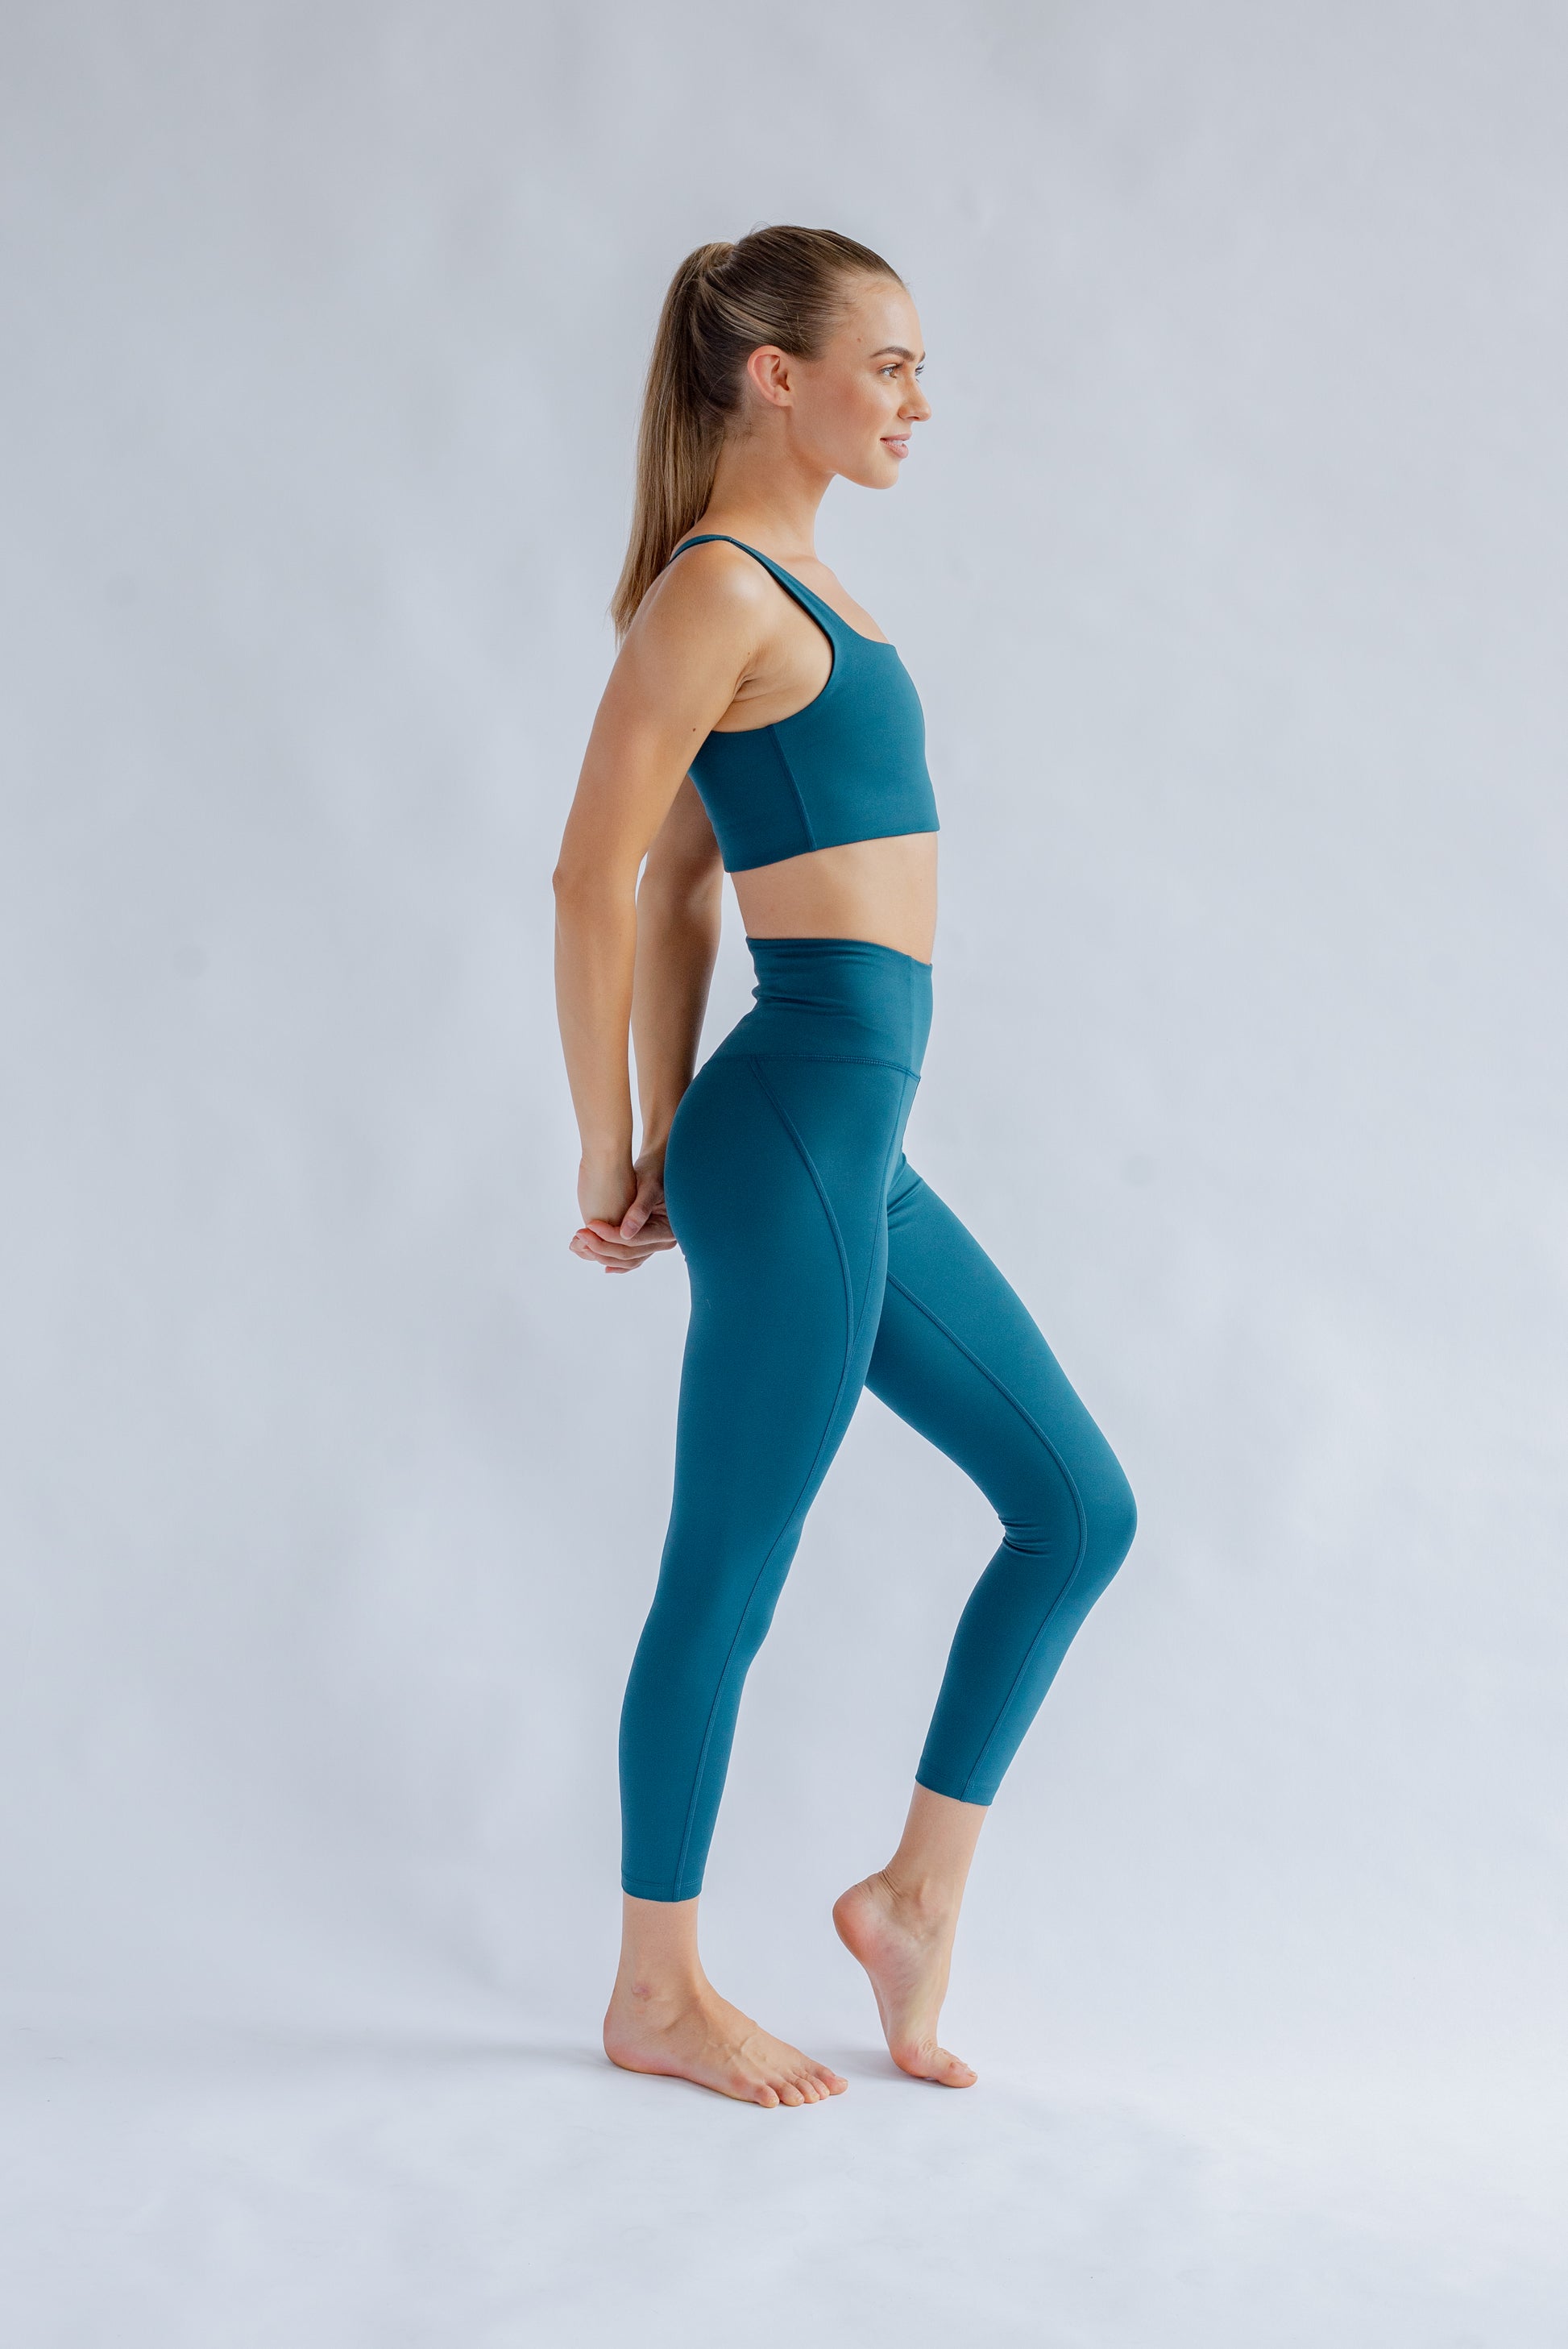 Girlfriend Collective teal workout leggings size Small - ShopperBoard